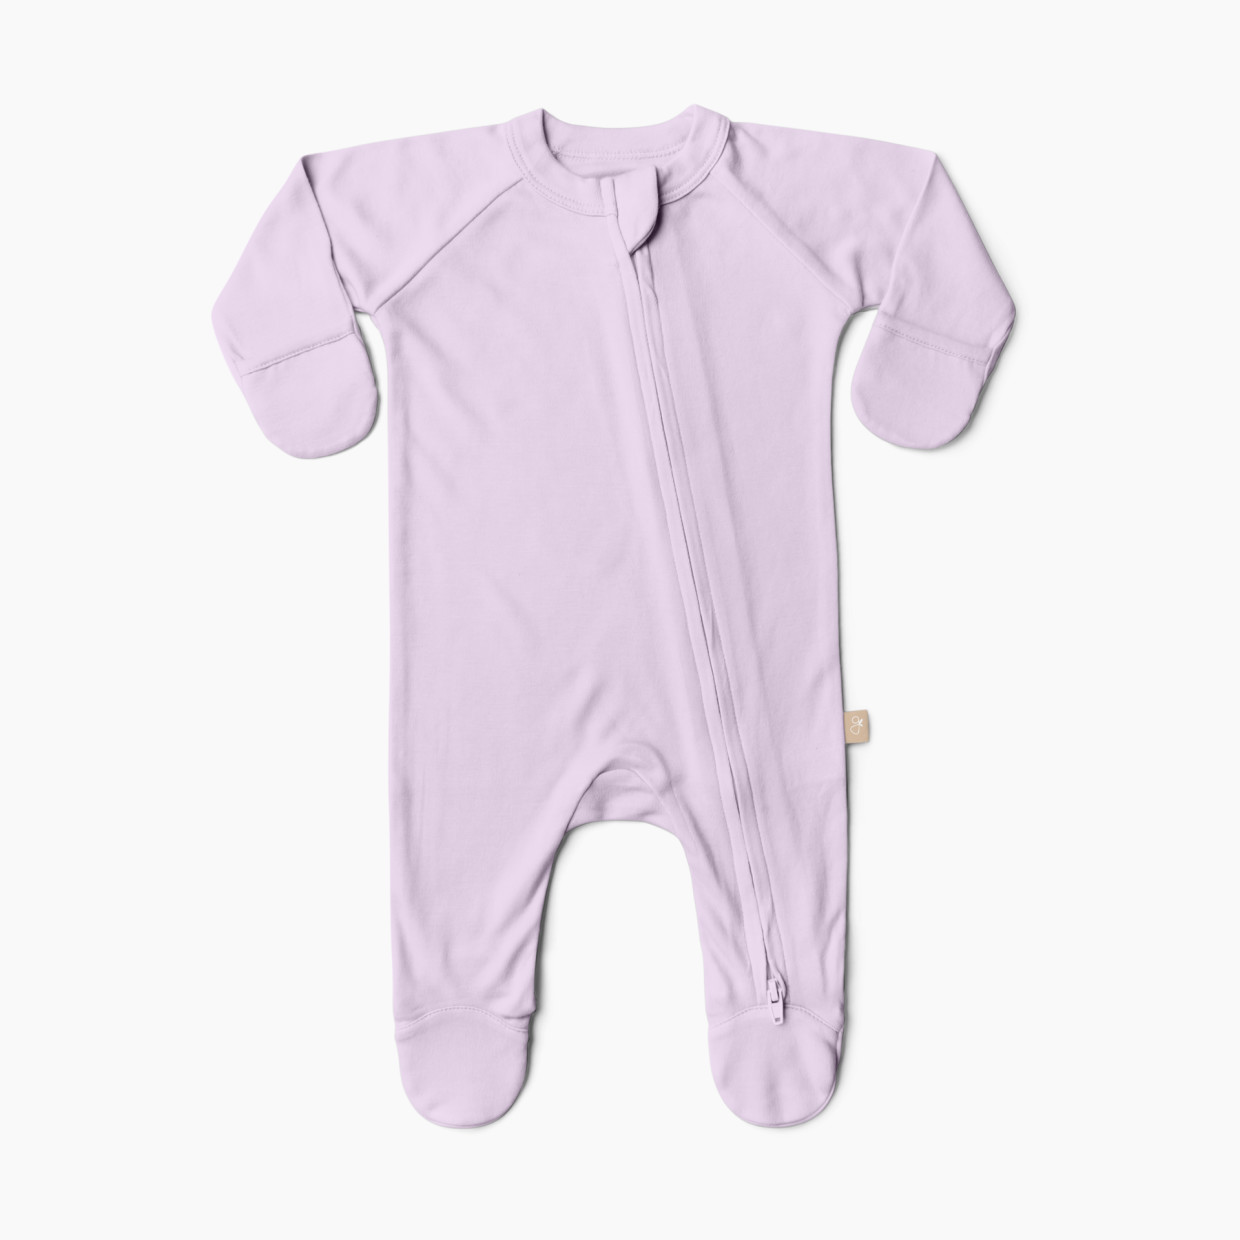 Goumi Kids x Babylist Grow With You Footie - Loose Fit - Lilac, 3-6 M.